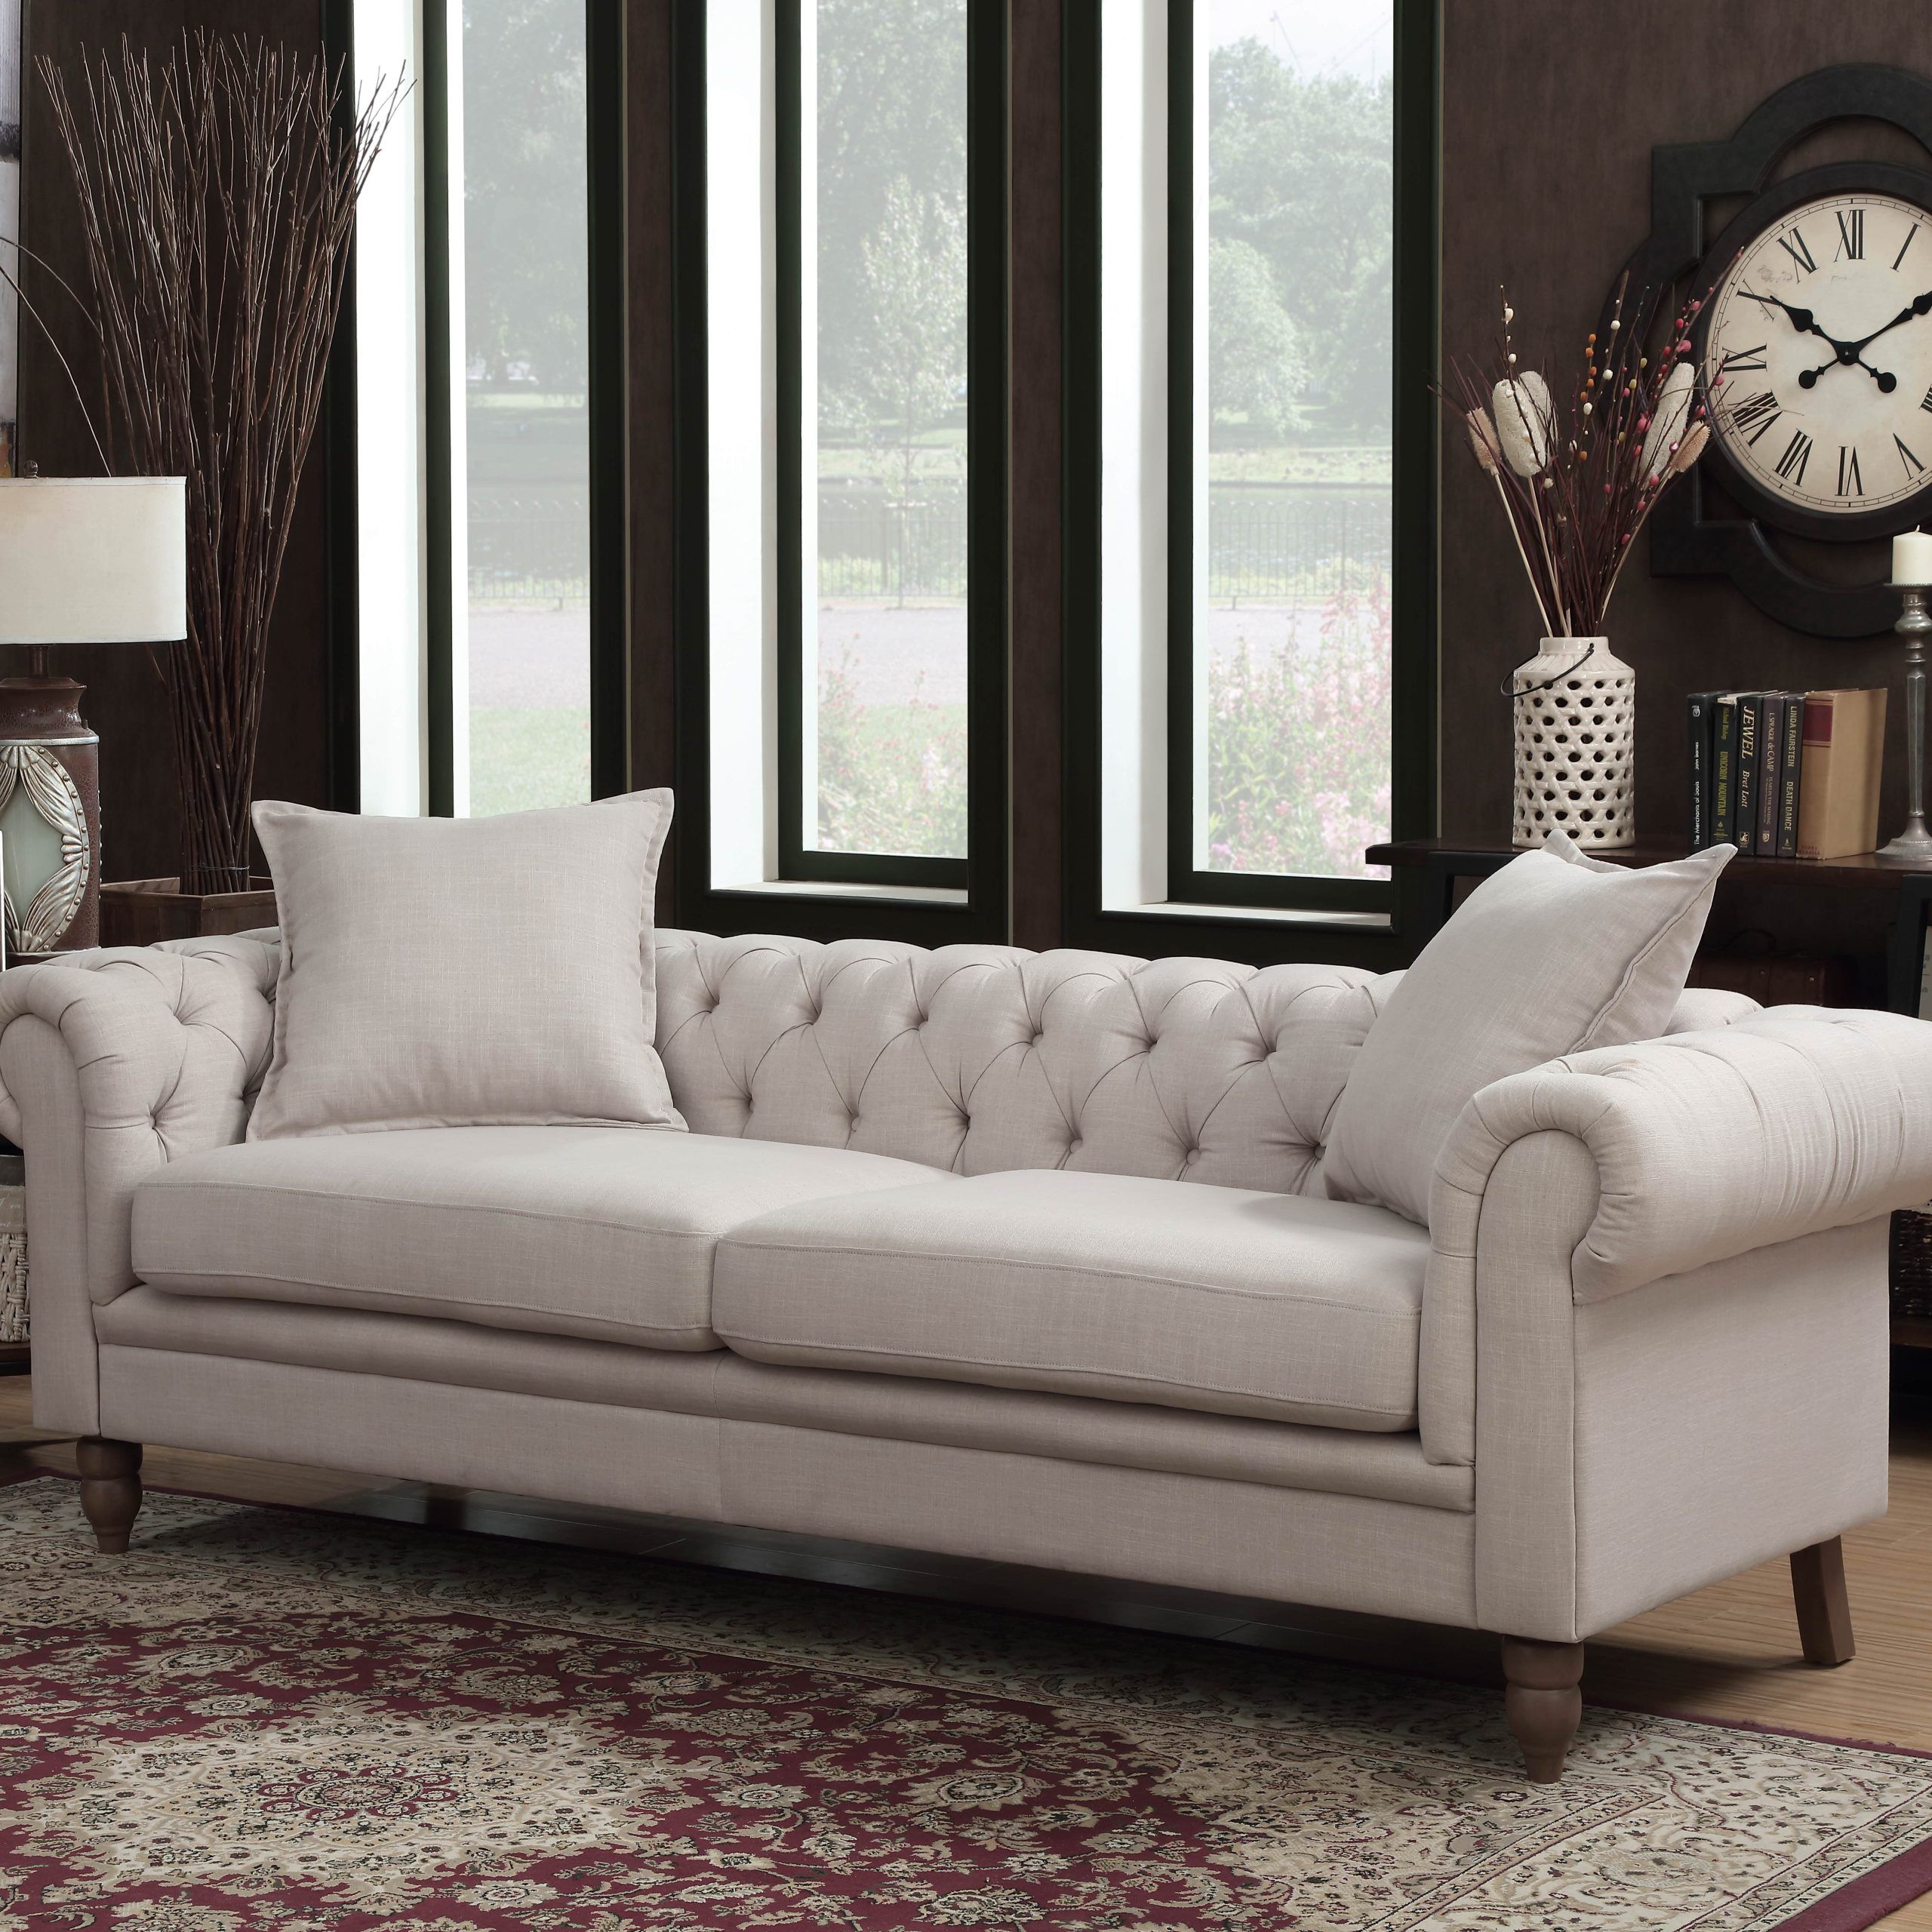 Juliet Collection Contemporary Linen Fabric Upholstered Button Tufted Intended For Tufted Upholstered Sofas (Gallery 9 of 20)